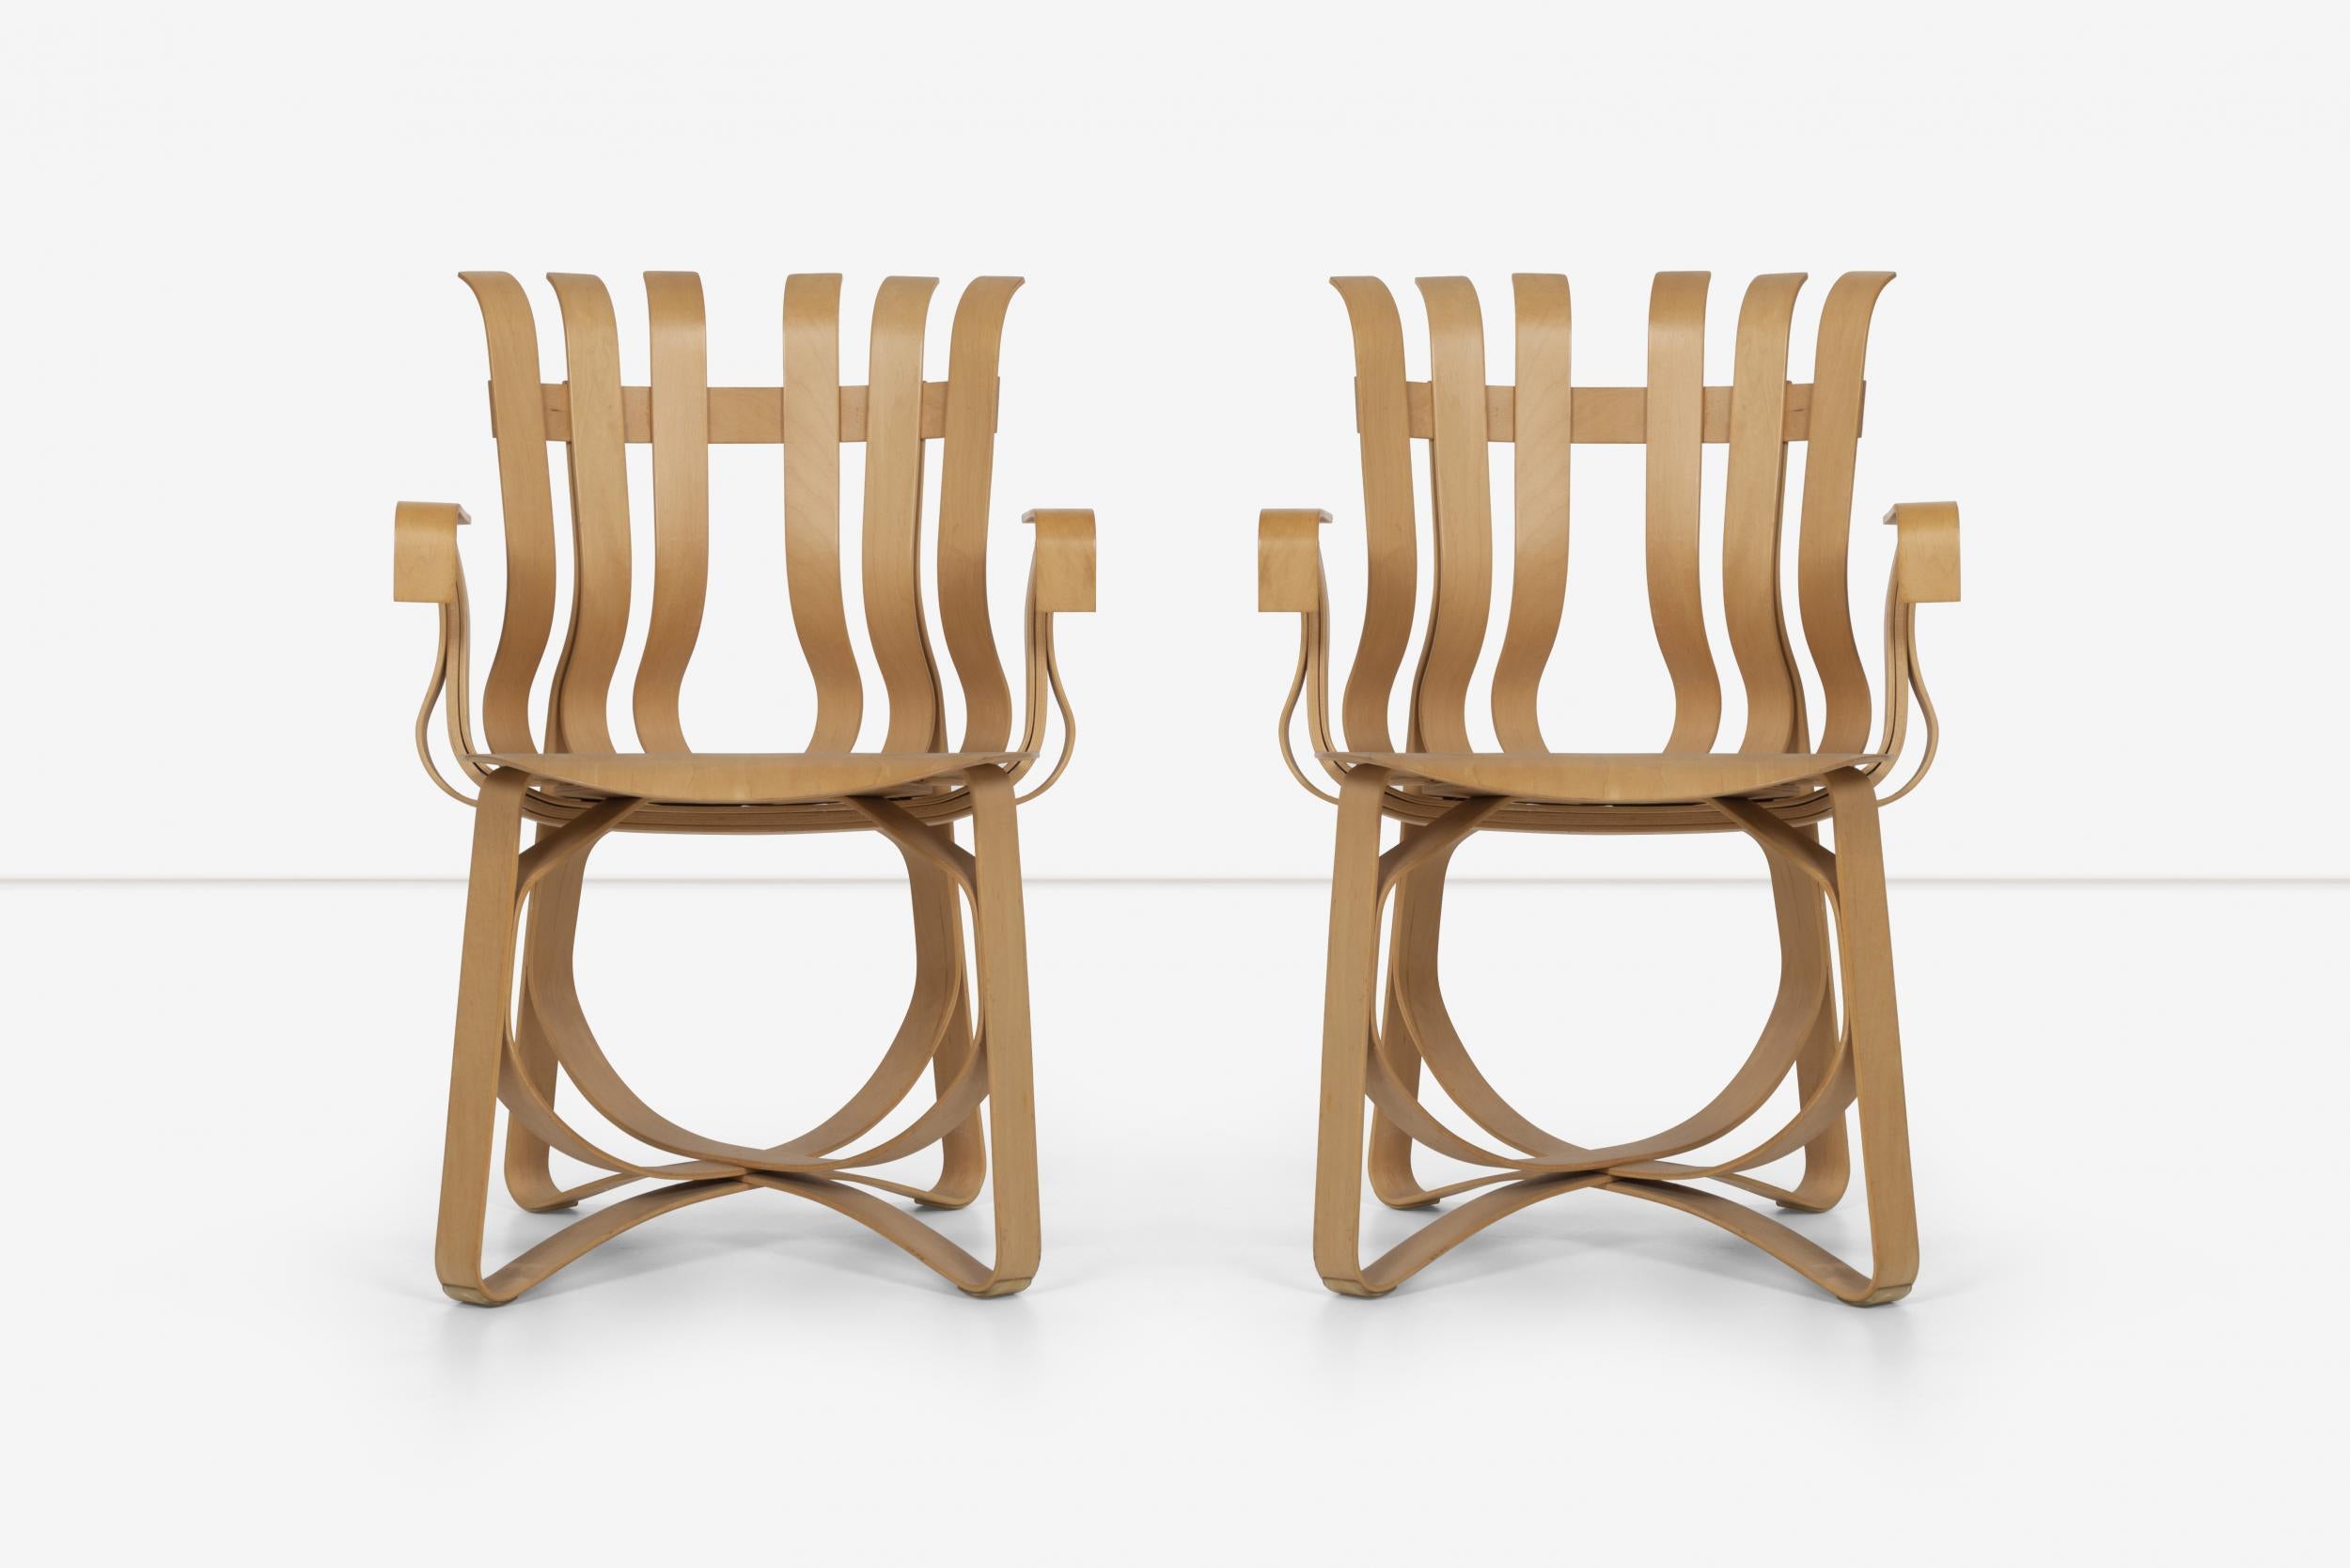 Frank Ghery hat trick arm chairs for Knoll, bentwood furniture inspired by the simple bushel basket.
Gehry quotes: